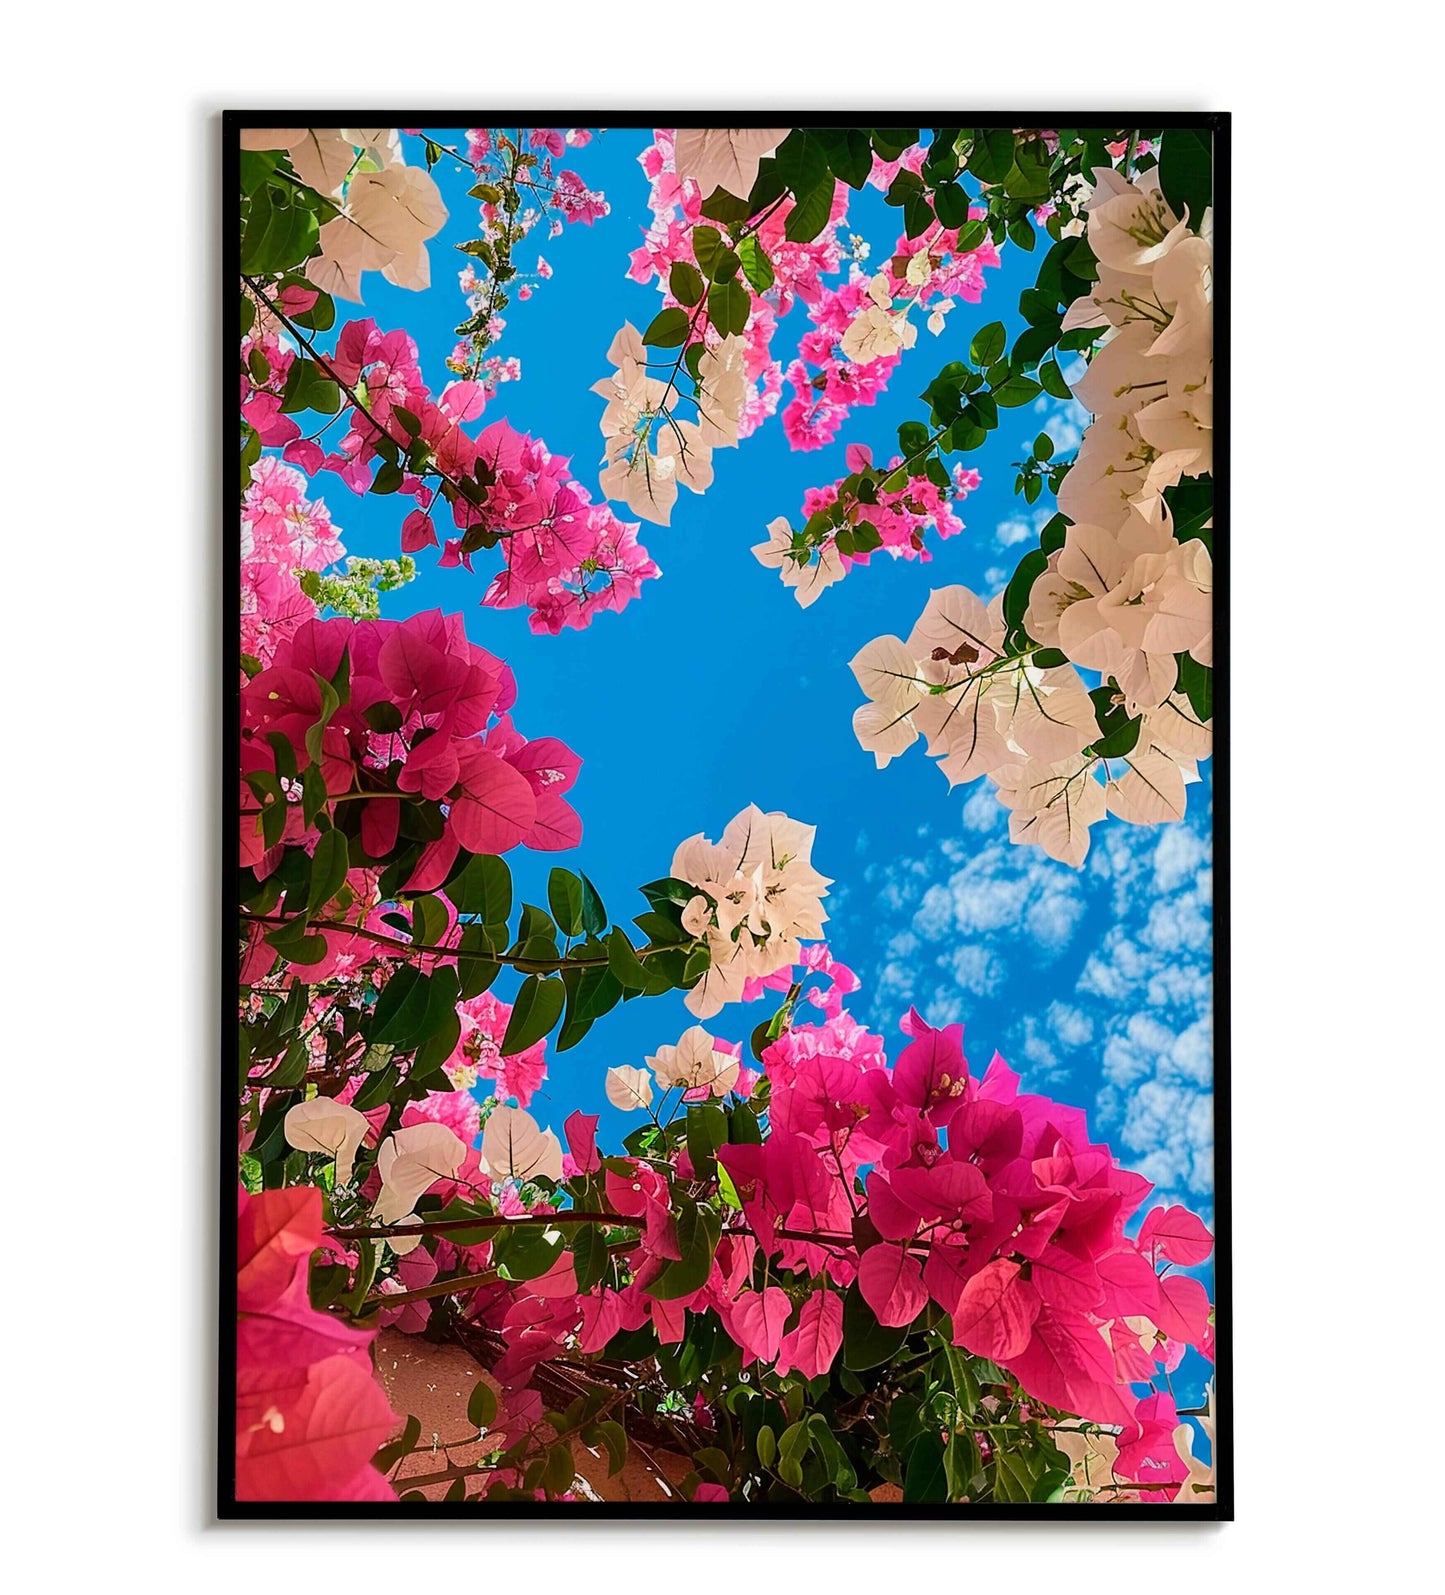 Blooming Garden(1 of 2) printable poster. Available for purchase as a physical poster or digital download